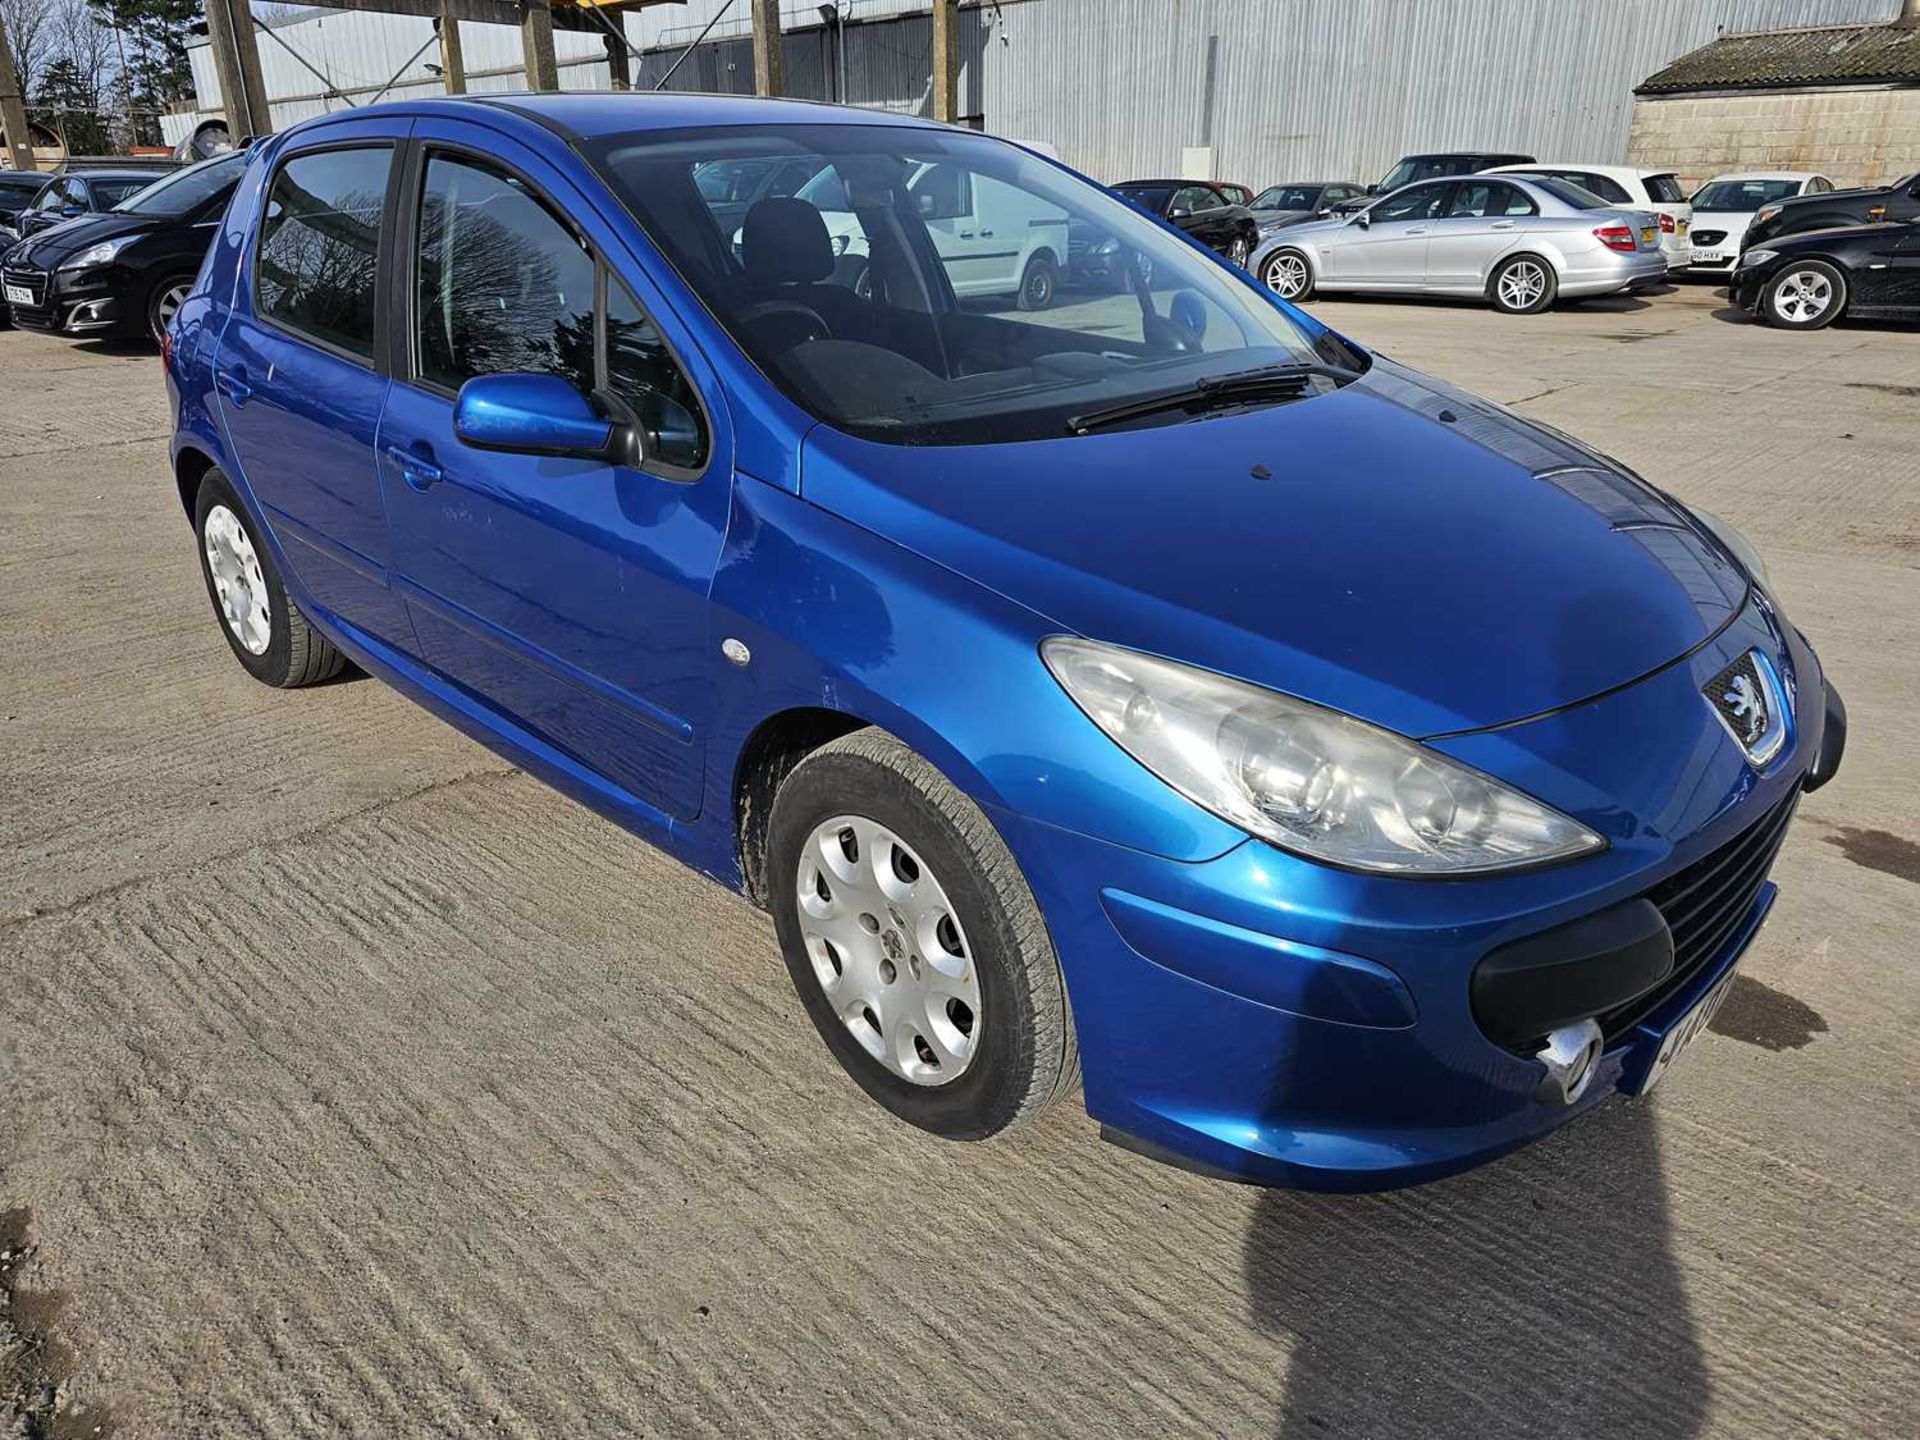 2007 Peugeot 307 X-line, 5 Speed, A/C (Reg. Docs. & Service History Available, Tested 07/24) - Image 6 of 56